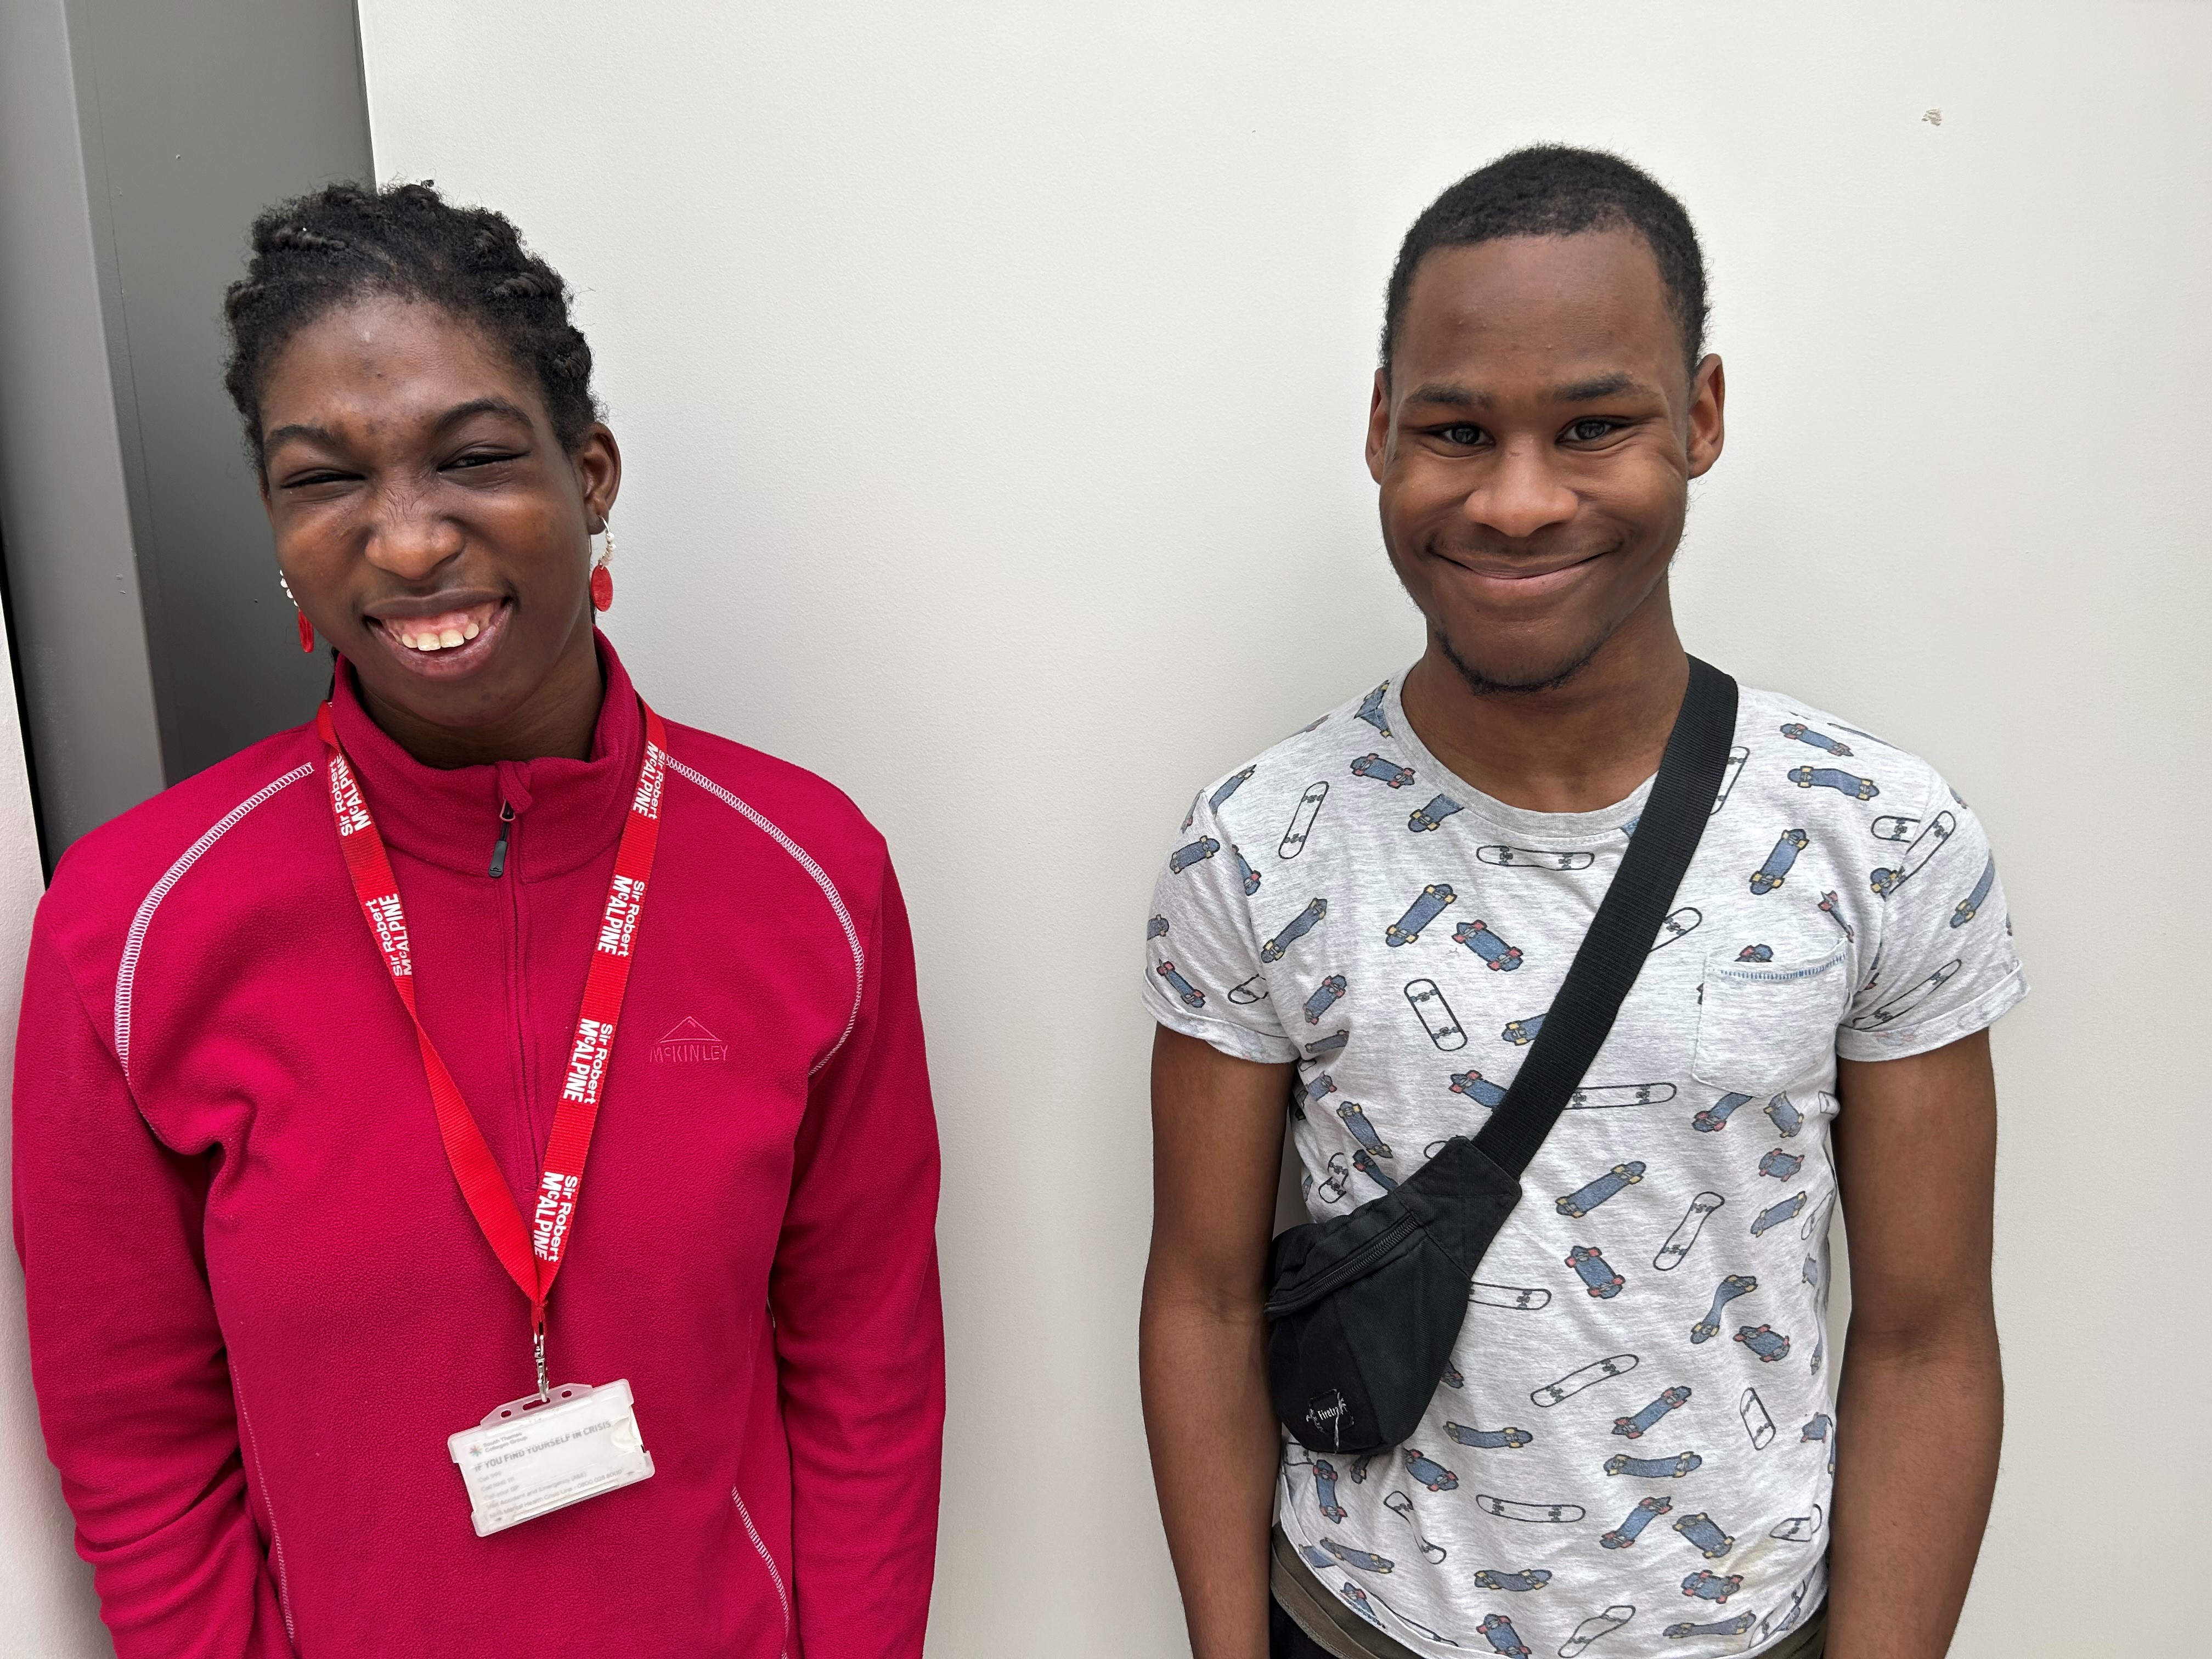 Foundation Learning students gain place on St George's Hospital Internship programme